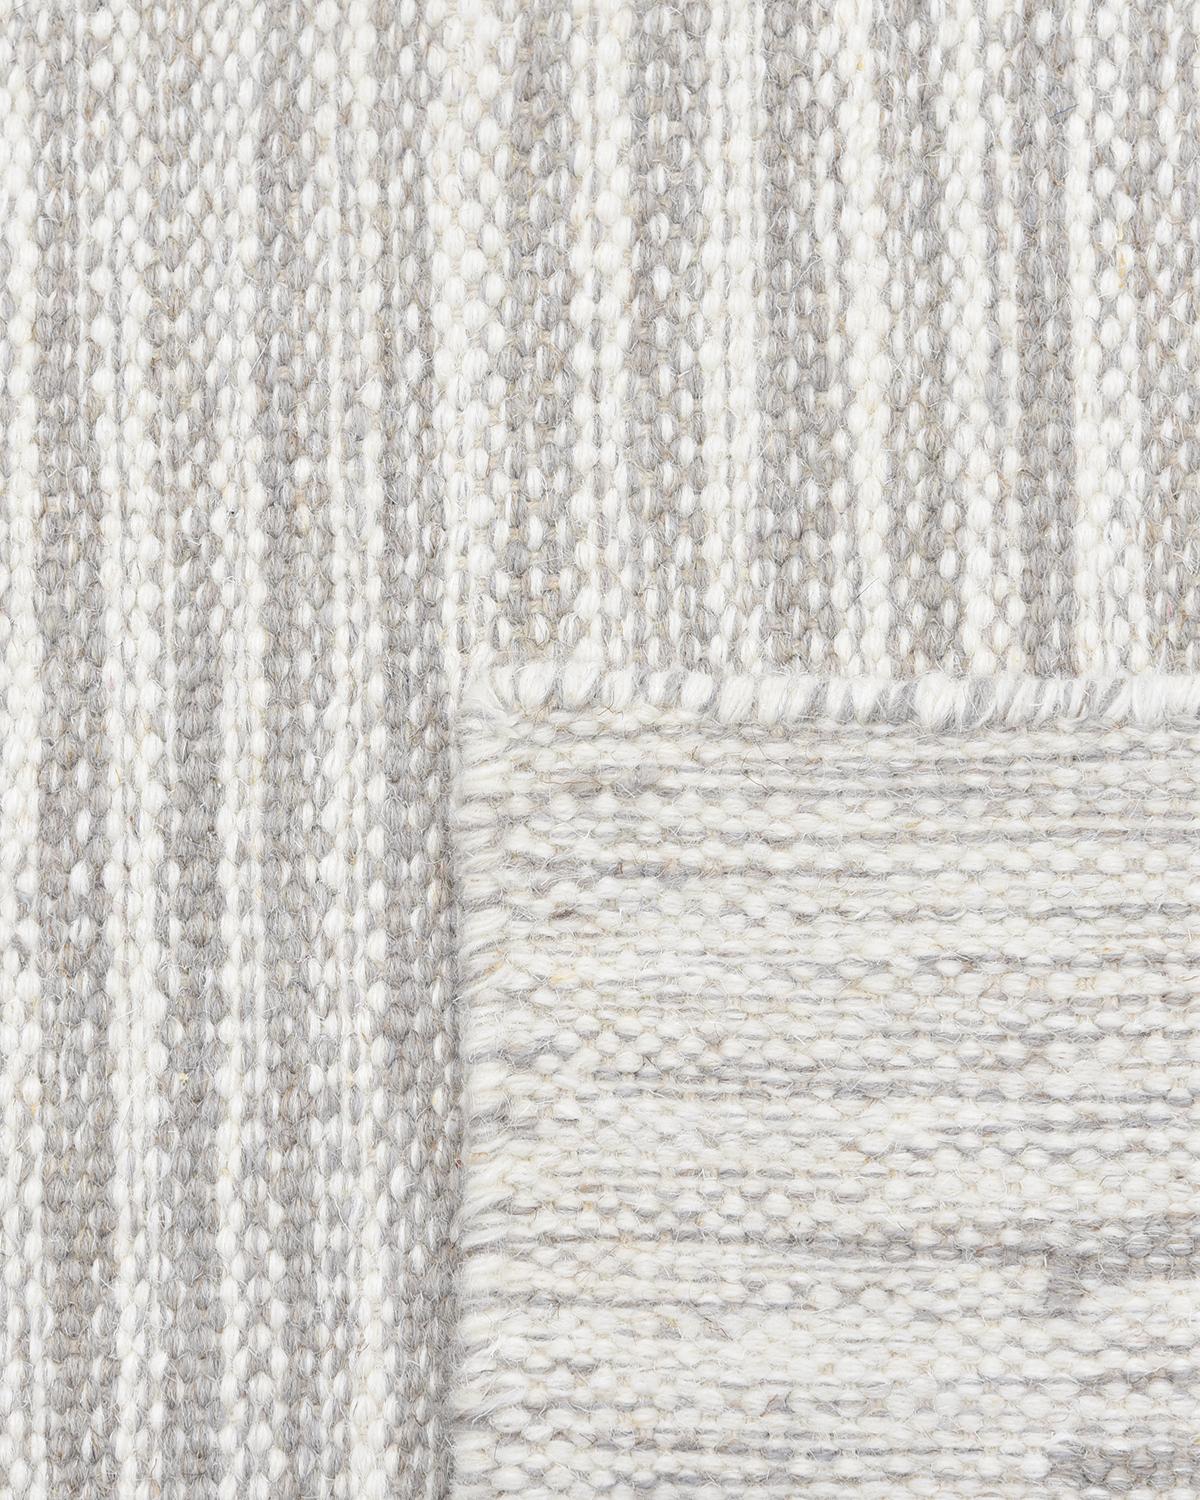 Solo Rugs George Contemporary Striped Handmade Area Rug Light Gray In New Condition For Sale In Norwalk, CT